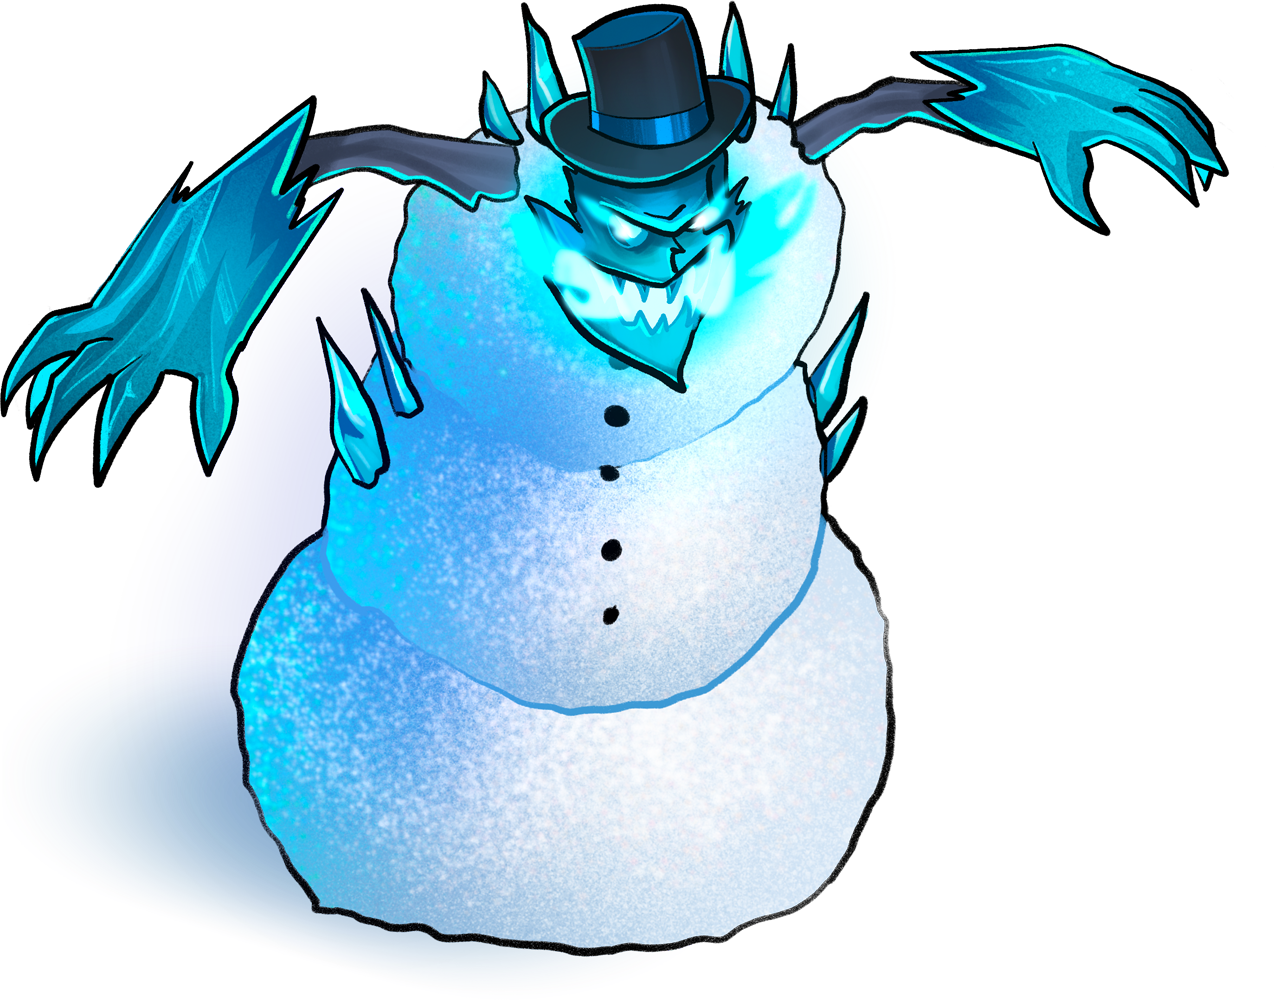 A massive snow man, built with the classic three snow balls on top of each other. Its face is a devilish frozen mask, belching cold flames. Icicles grow from it like spikes.